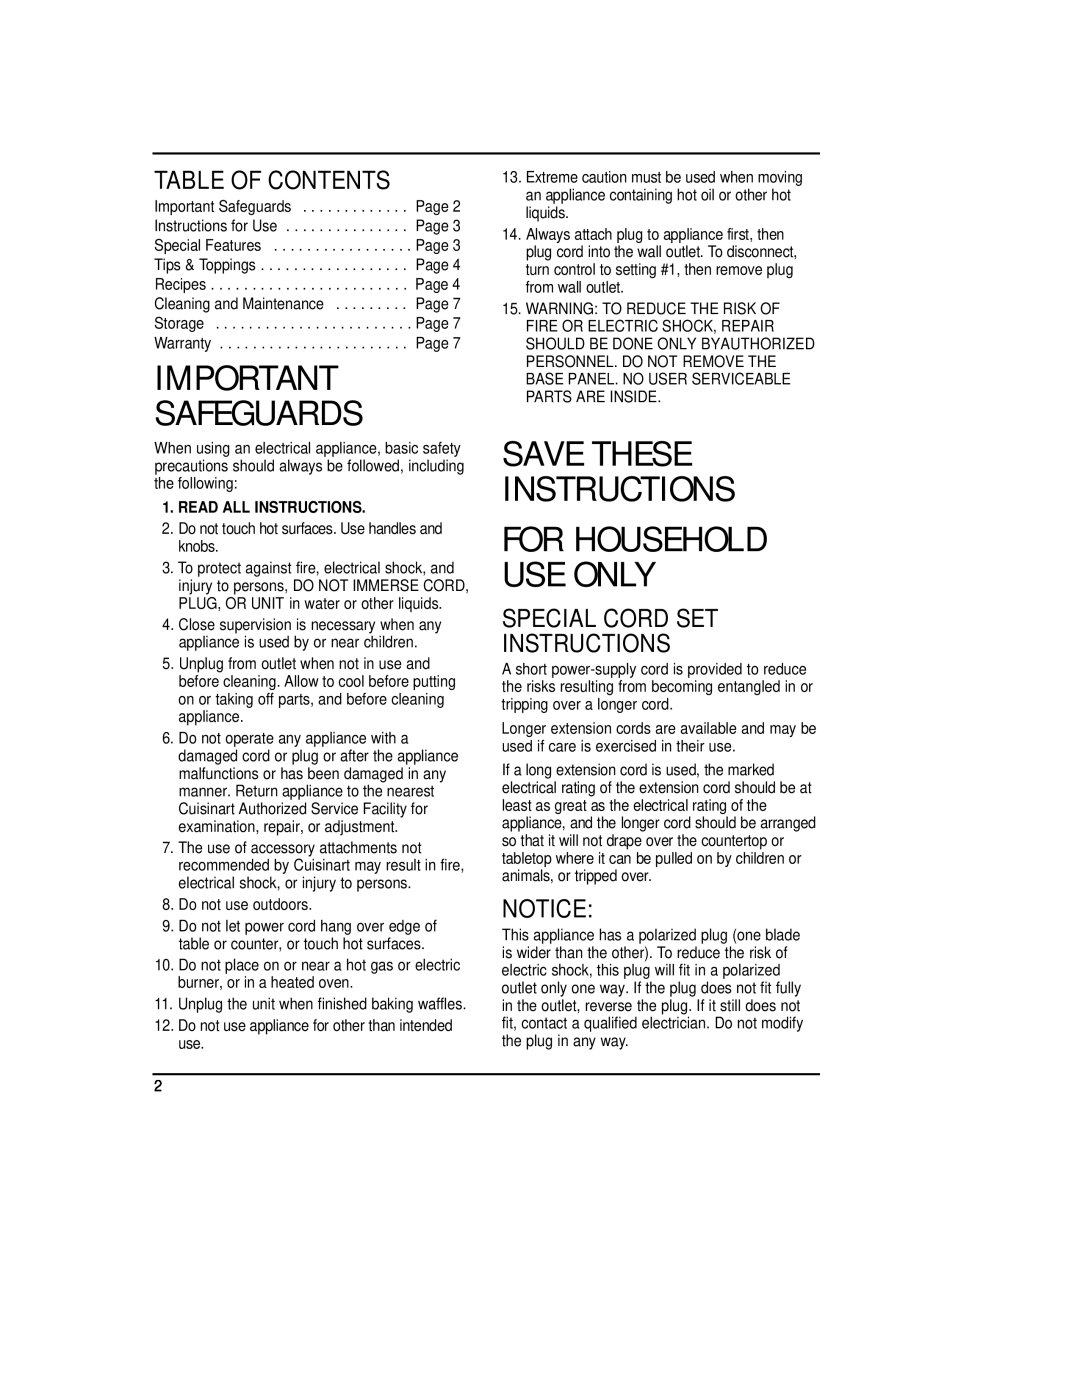 Cuisinart WMB-2AC manual Table Of Contents, Special Cord Set Instructions, Safeguards, Save These Instructions 